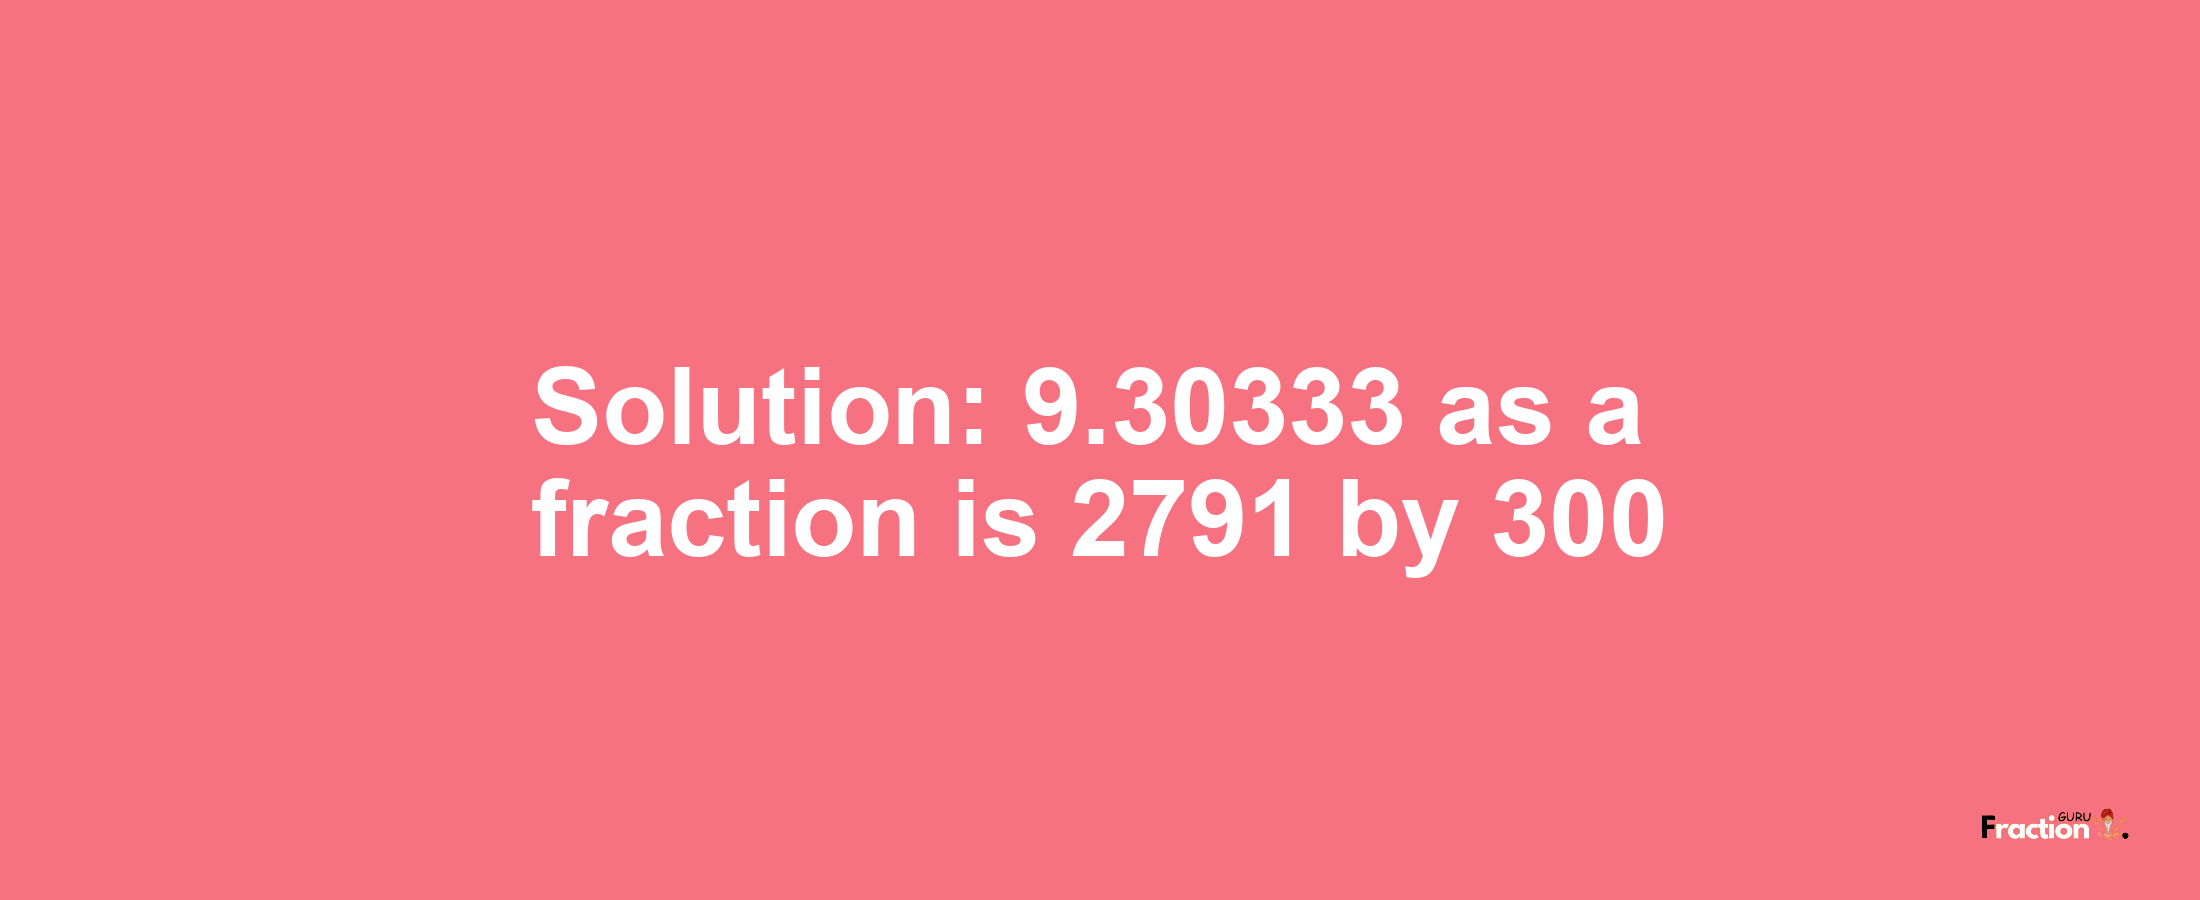 Solution:9.30333 as a fraction is 2791/300